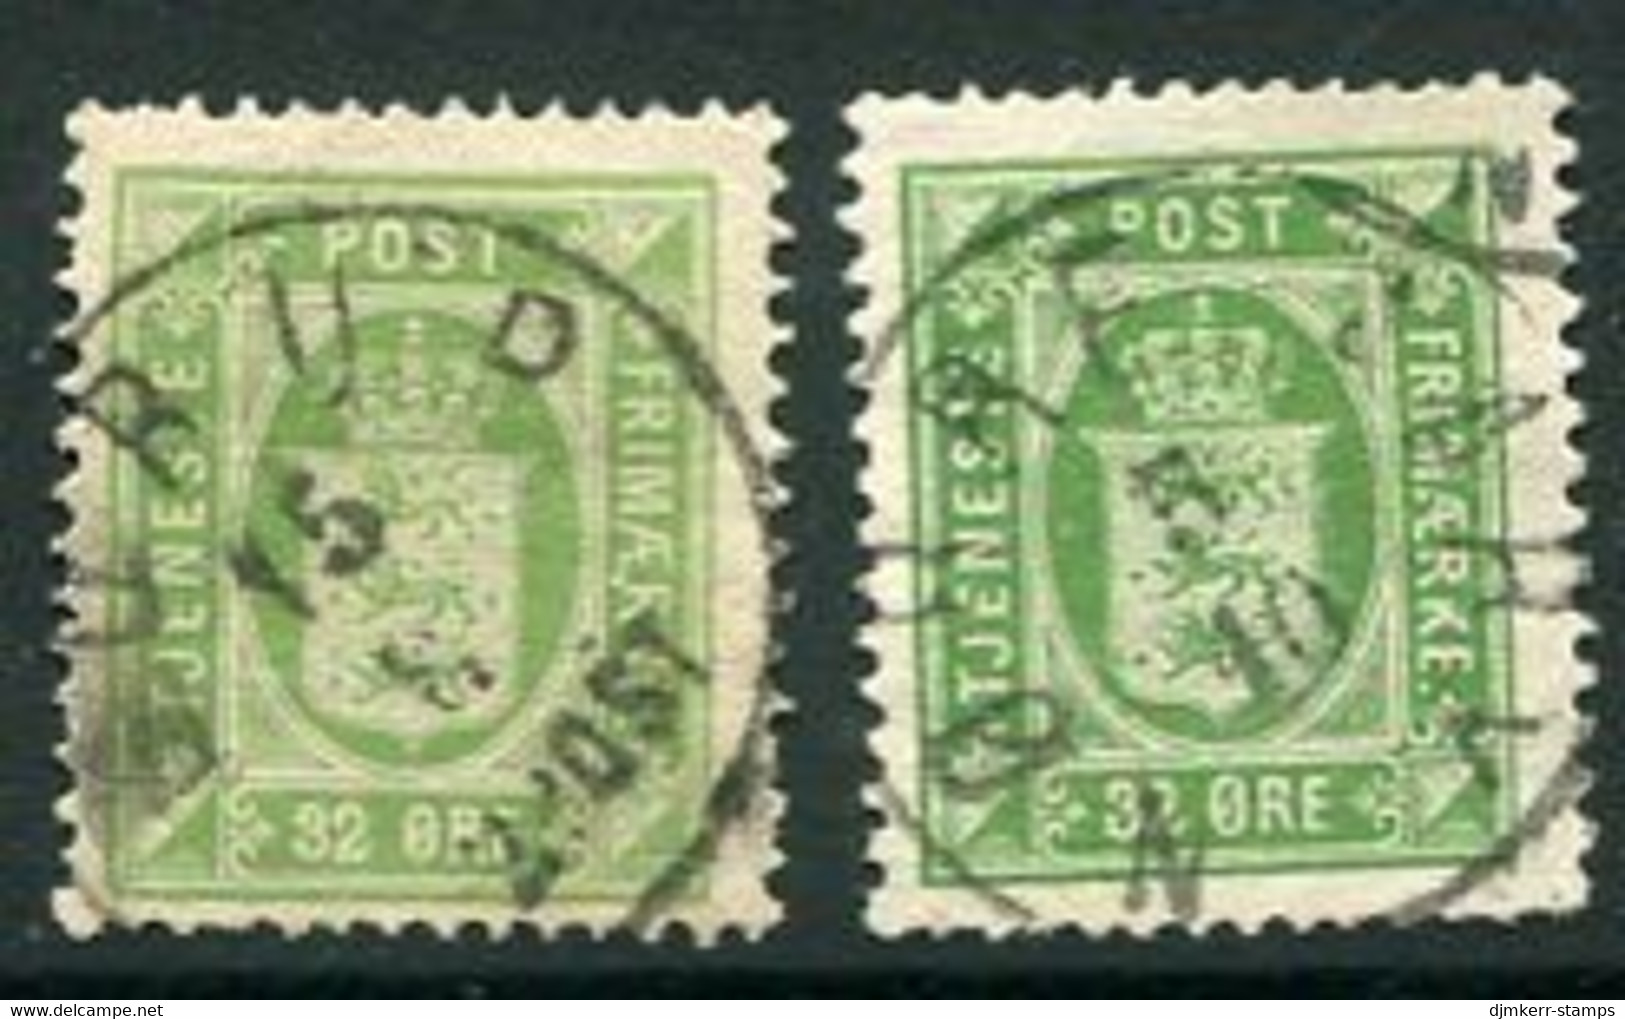 DENMARK 1875 Official 32 Øre Perforated 14 X 13½ Yellow-green And Green, Used.  SG O97-98 Cat. £109. - Officials